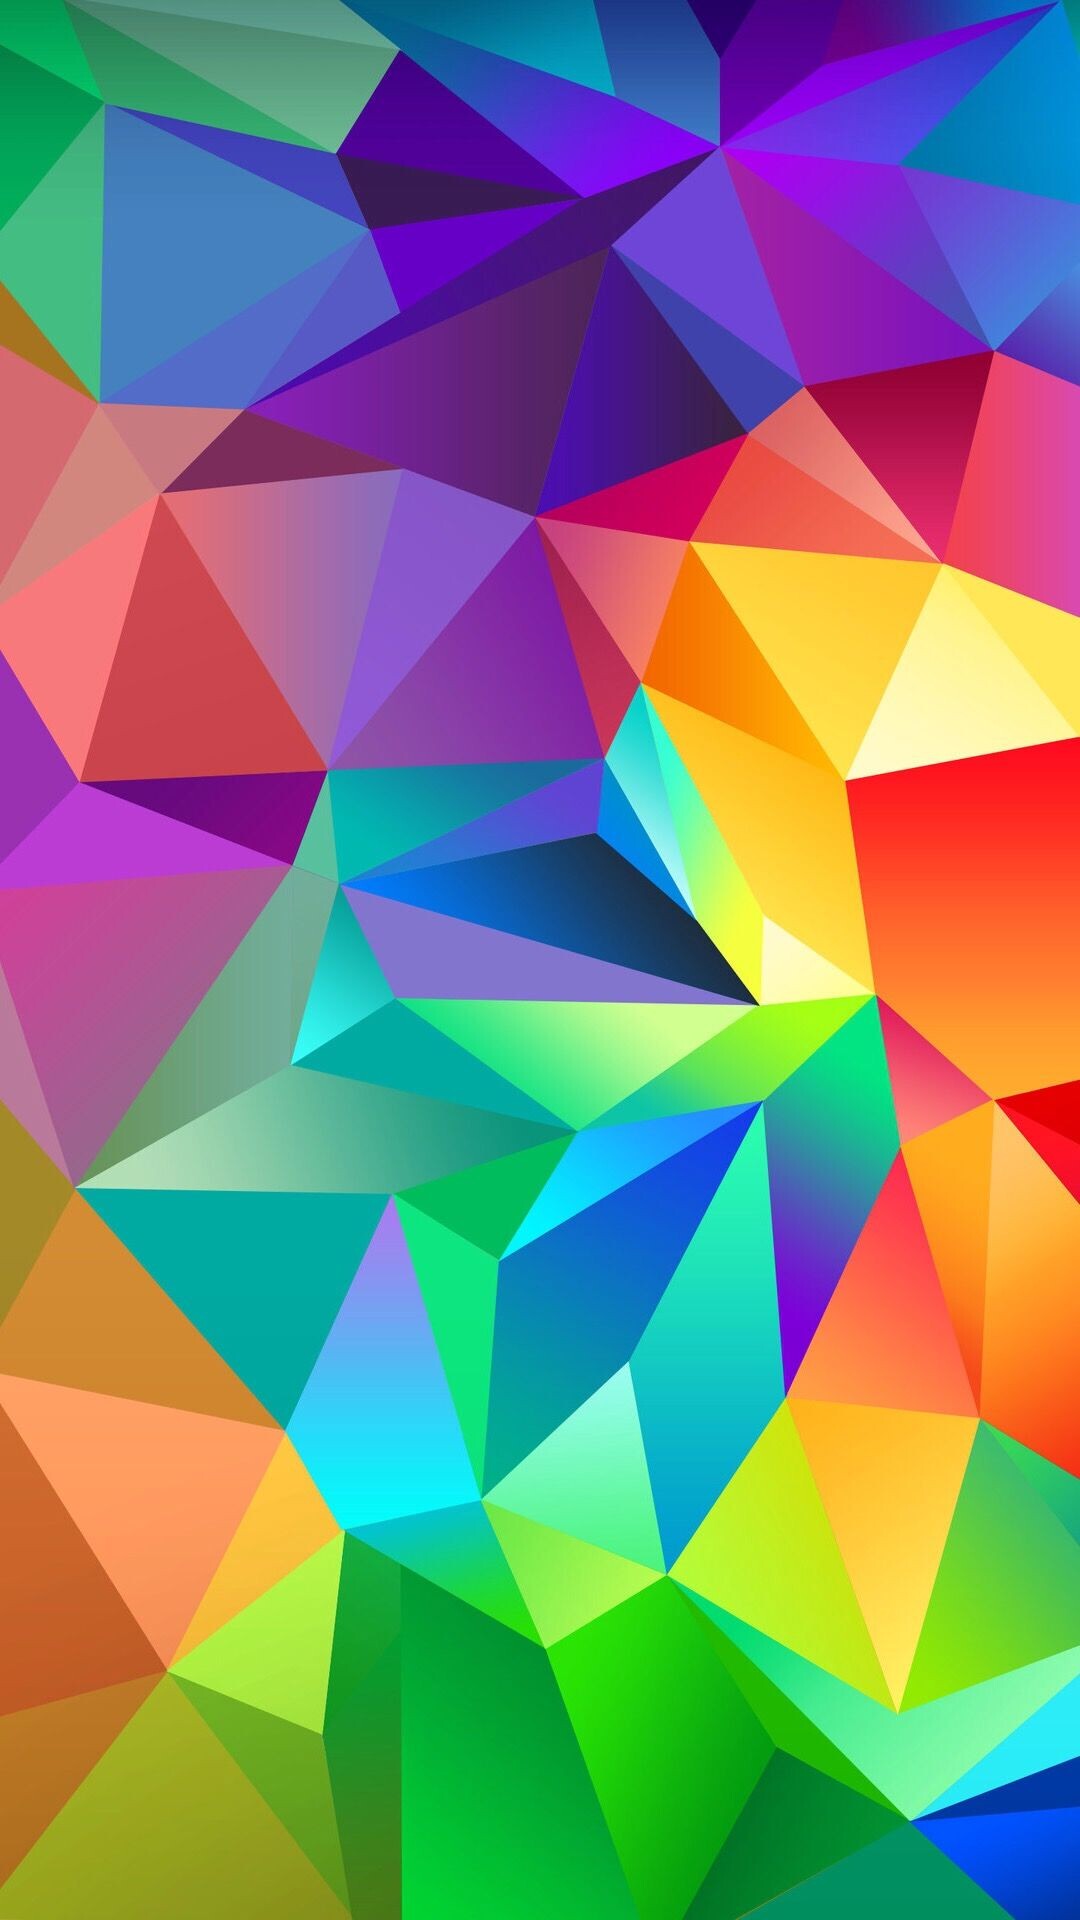 Geometric Abstract: Rainbow triangles, Multicolored, Obtuse angles. 1080x1920 Full HD Wallpaper.